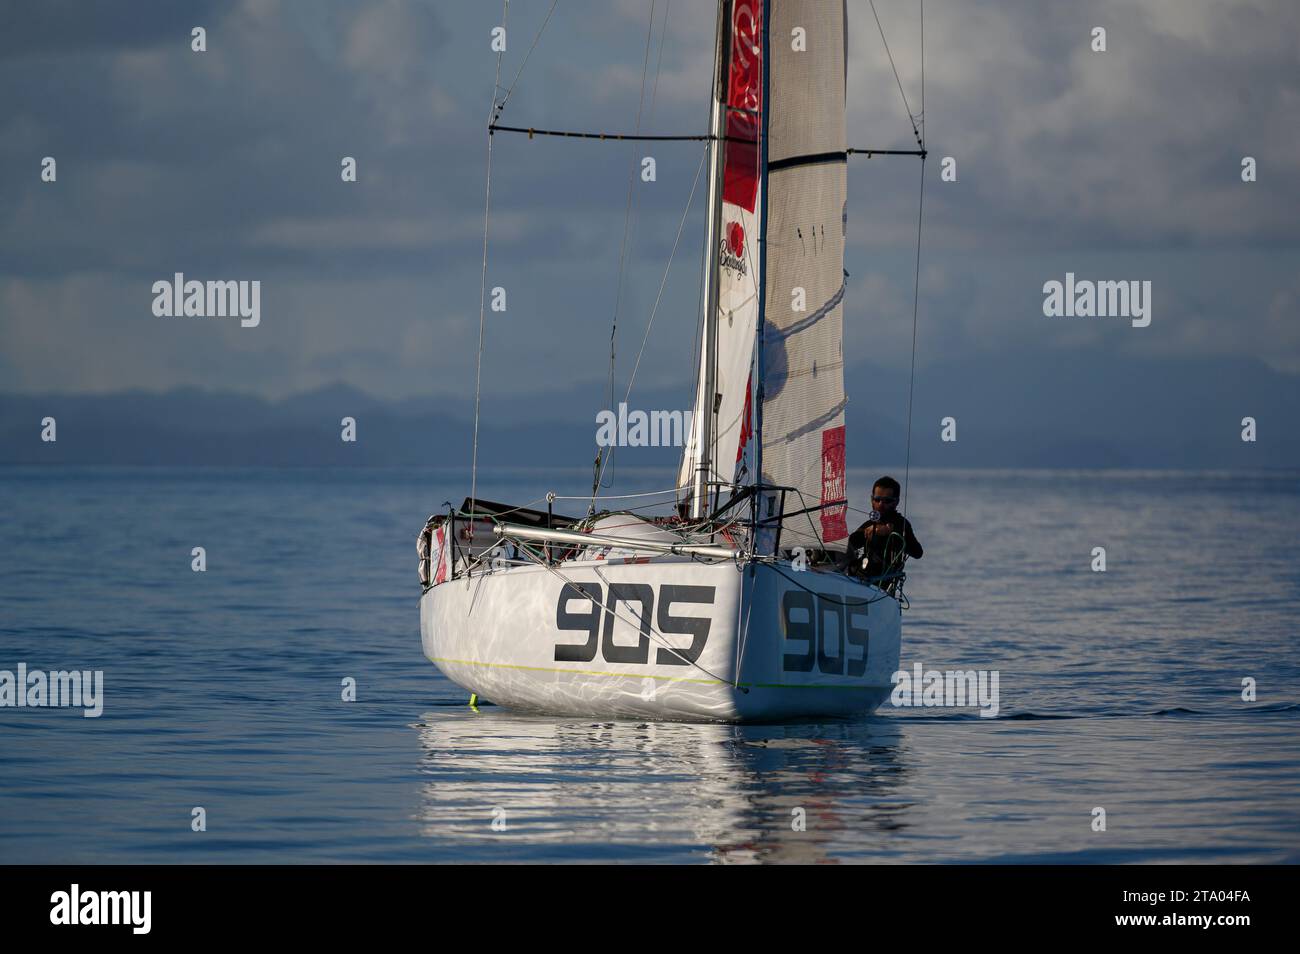 Nicolas D'ESTAIS, Cheminant Ursuit, 2nd of the production boat category of the 2 leg in 13 jours, 21 heures, 05 minutes et 44 secondes during the arrival of the Mini Transat La Boulangere 2019, Class 6,50 sailing race between La Rochelle - Las Palmas de Gran Canaria - Le Marin, from Le Marin, France on November 16, 2019 - Photo Olivier Blanchet / DPPI Stock Photo